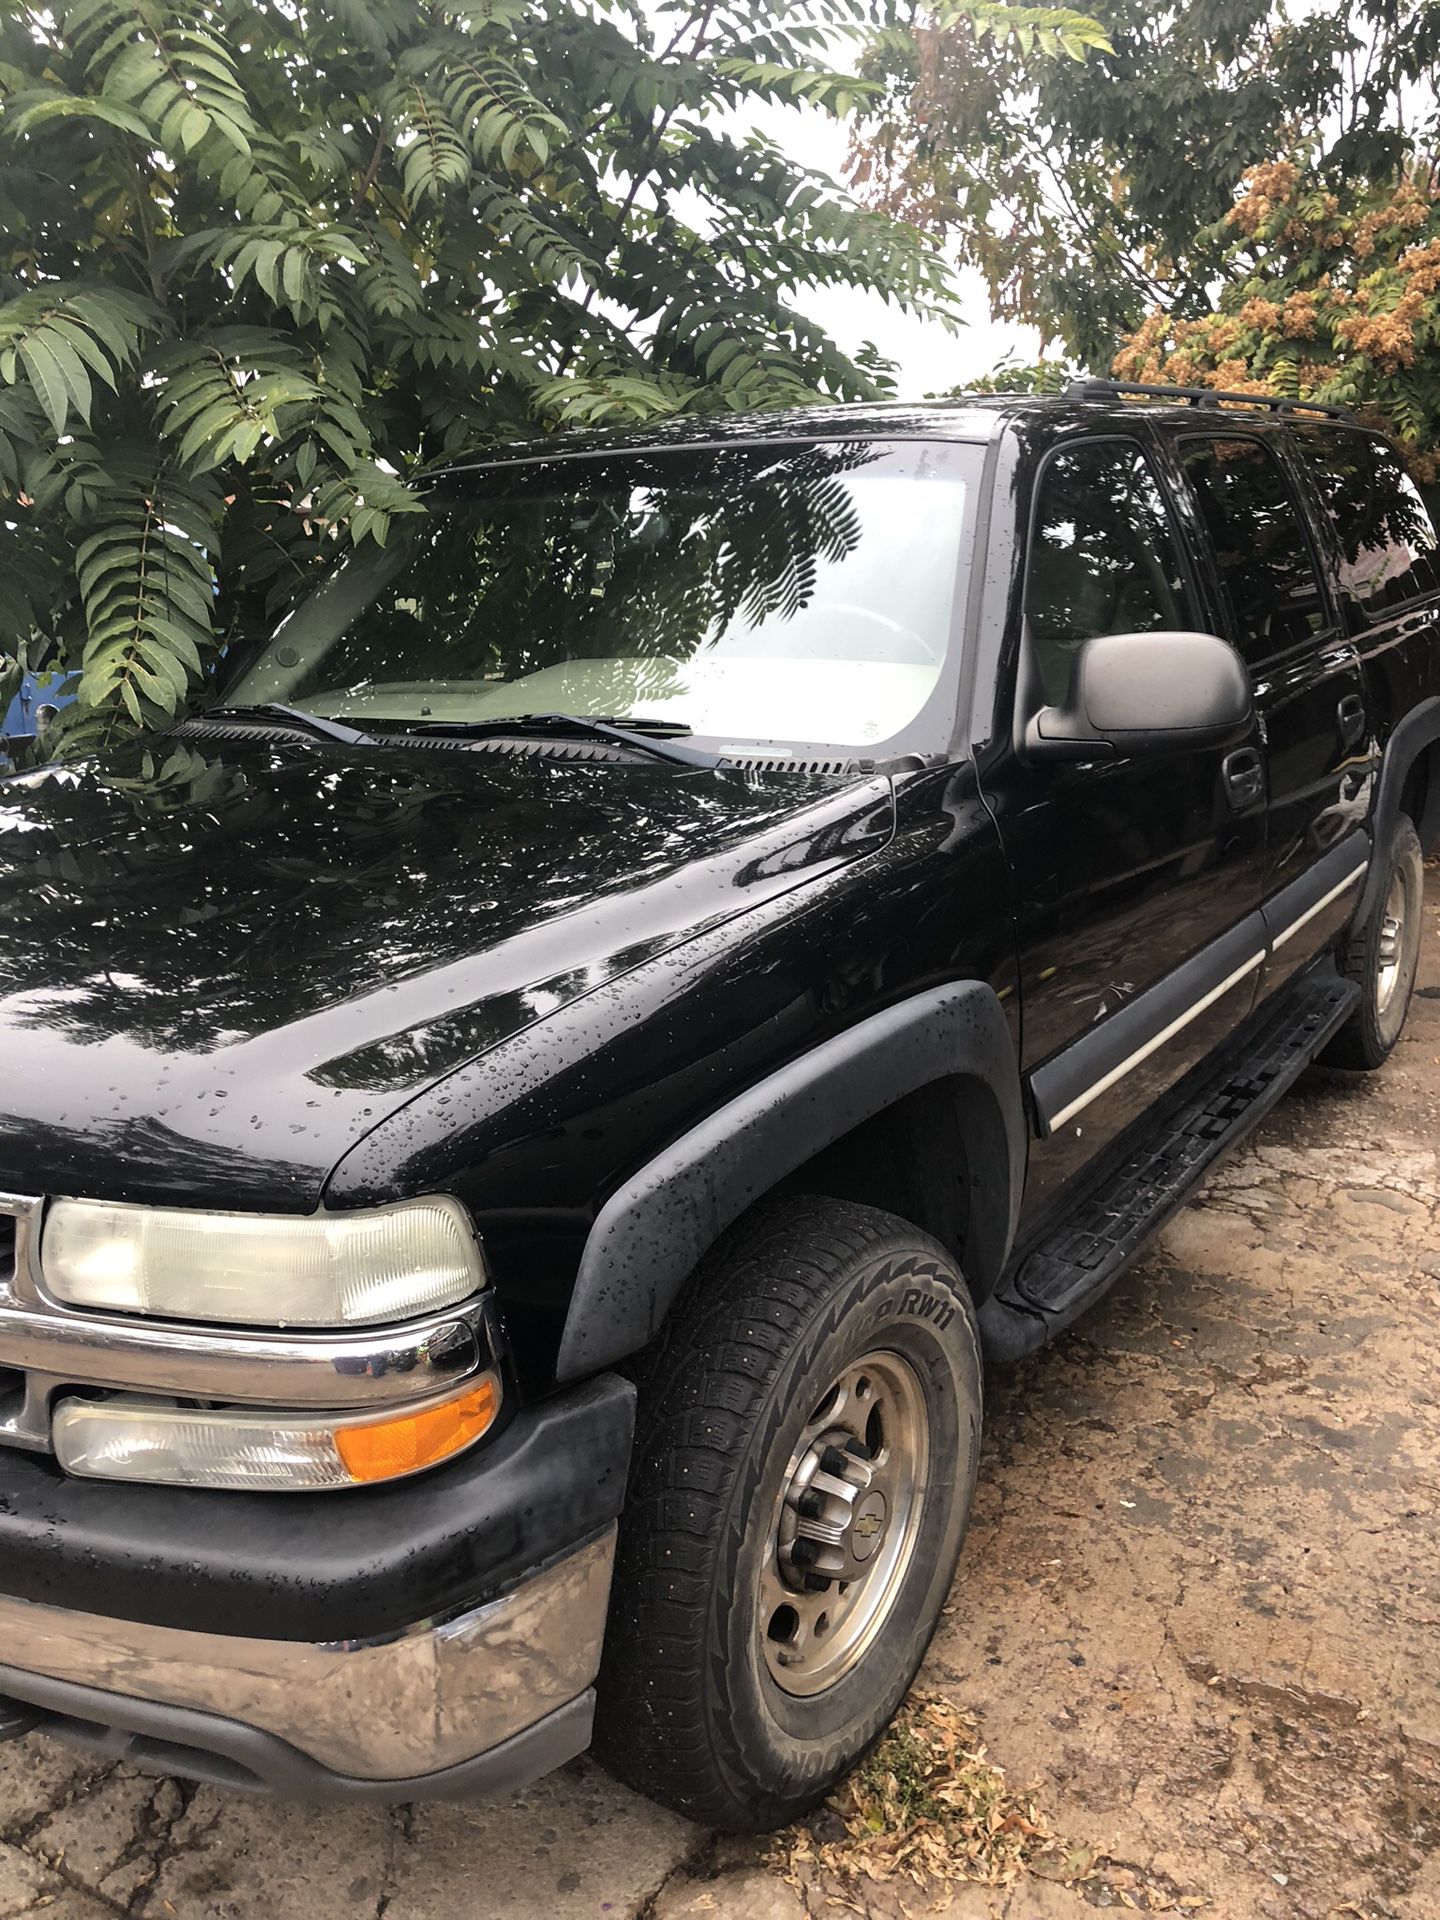 2003 Chevy suburban 2500 parts only